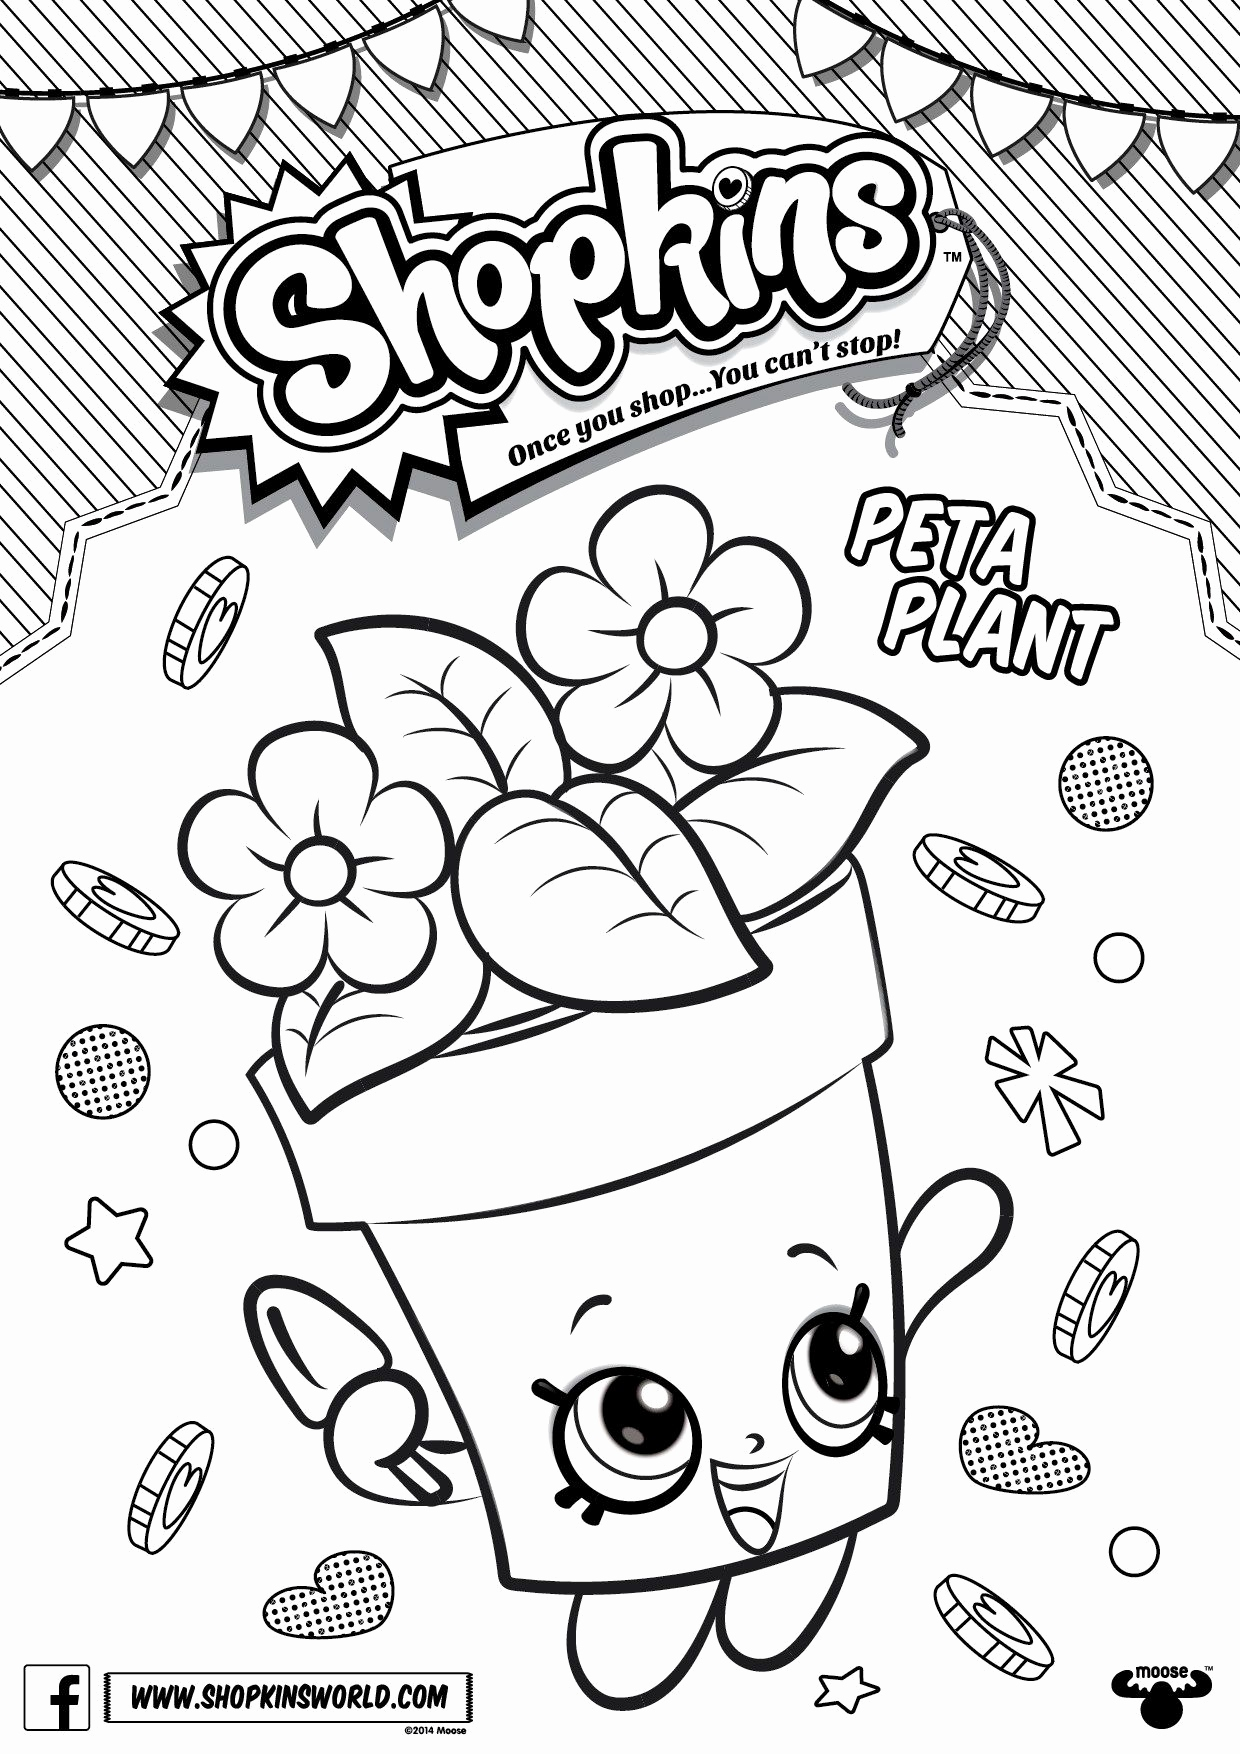 Customized Coloring Pages Coloring Ideas Personalized Coloring Pages Ruva Of Customized